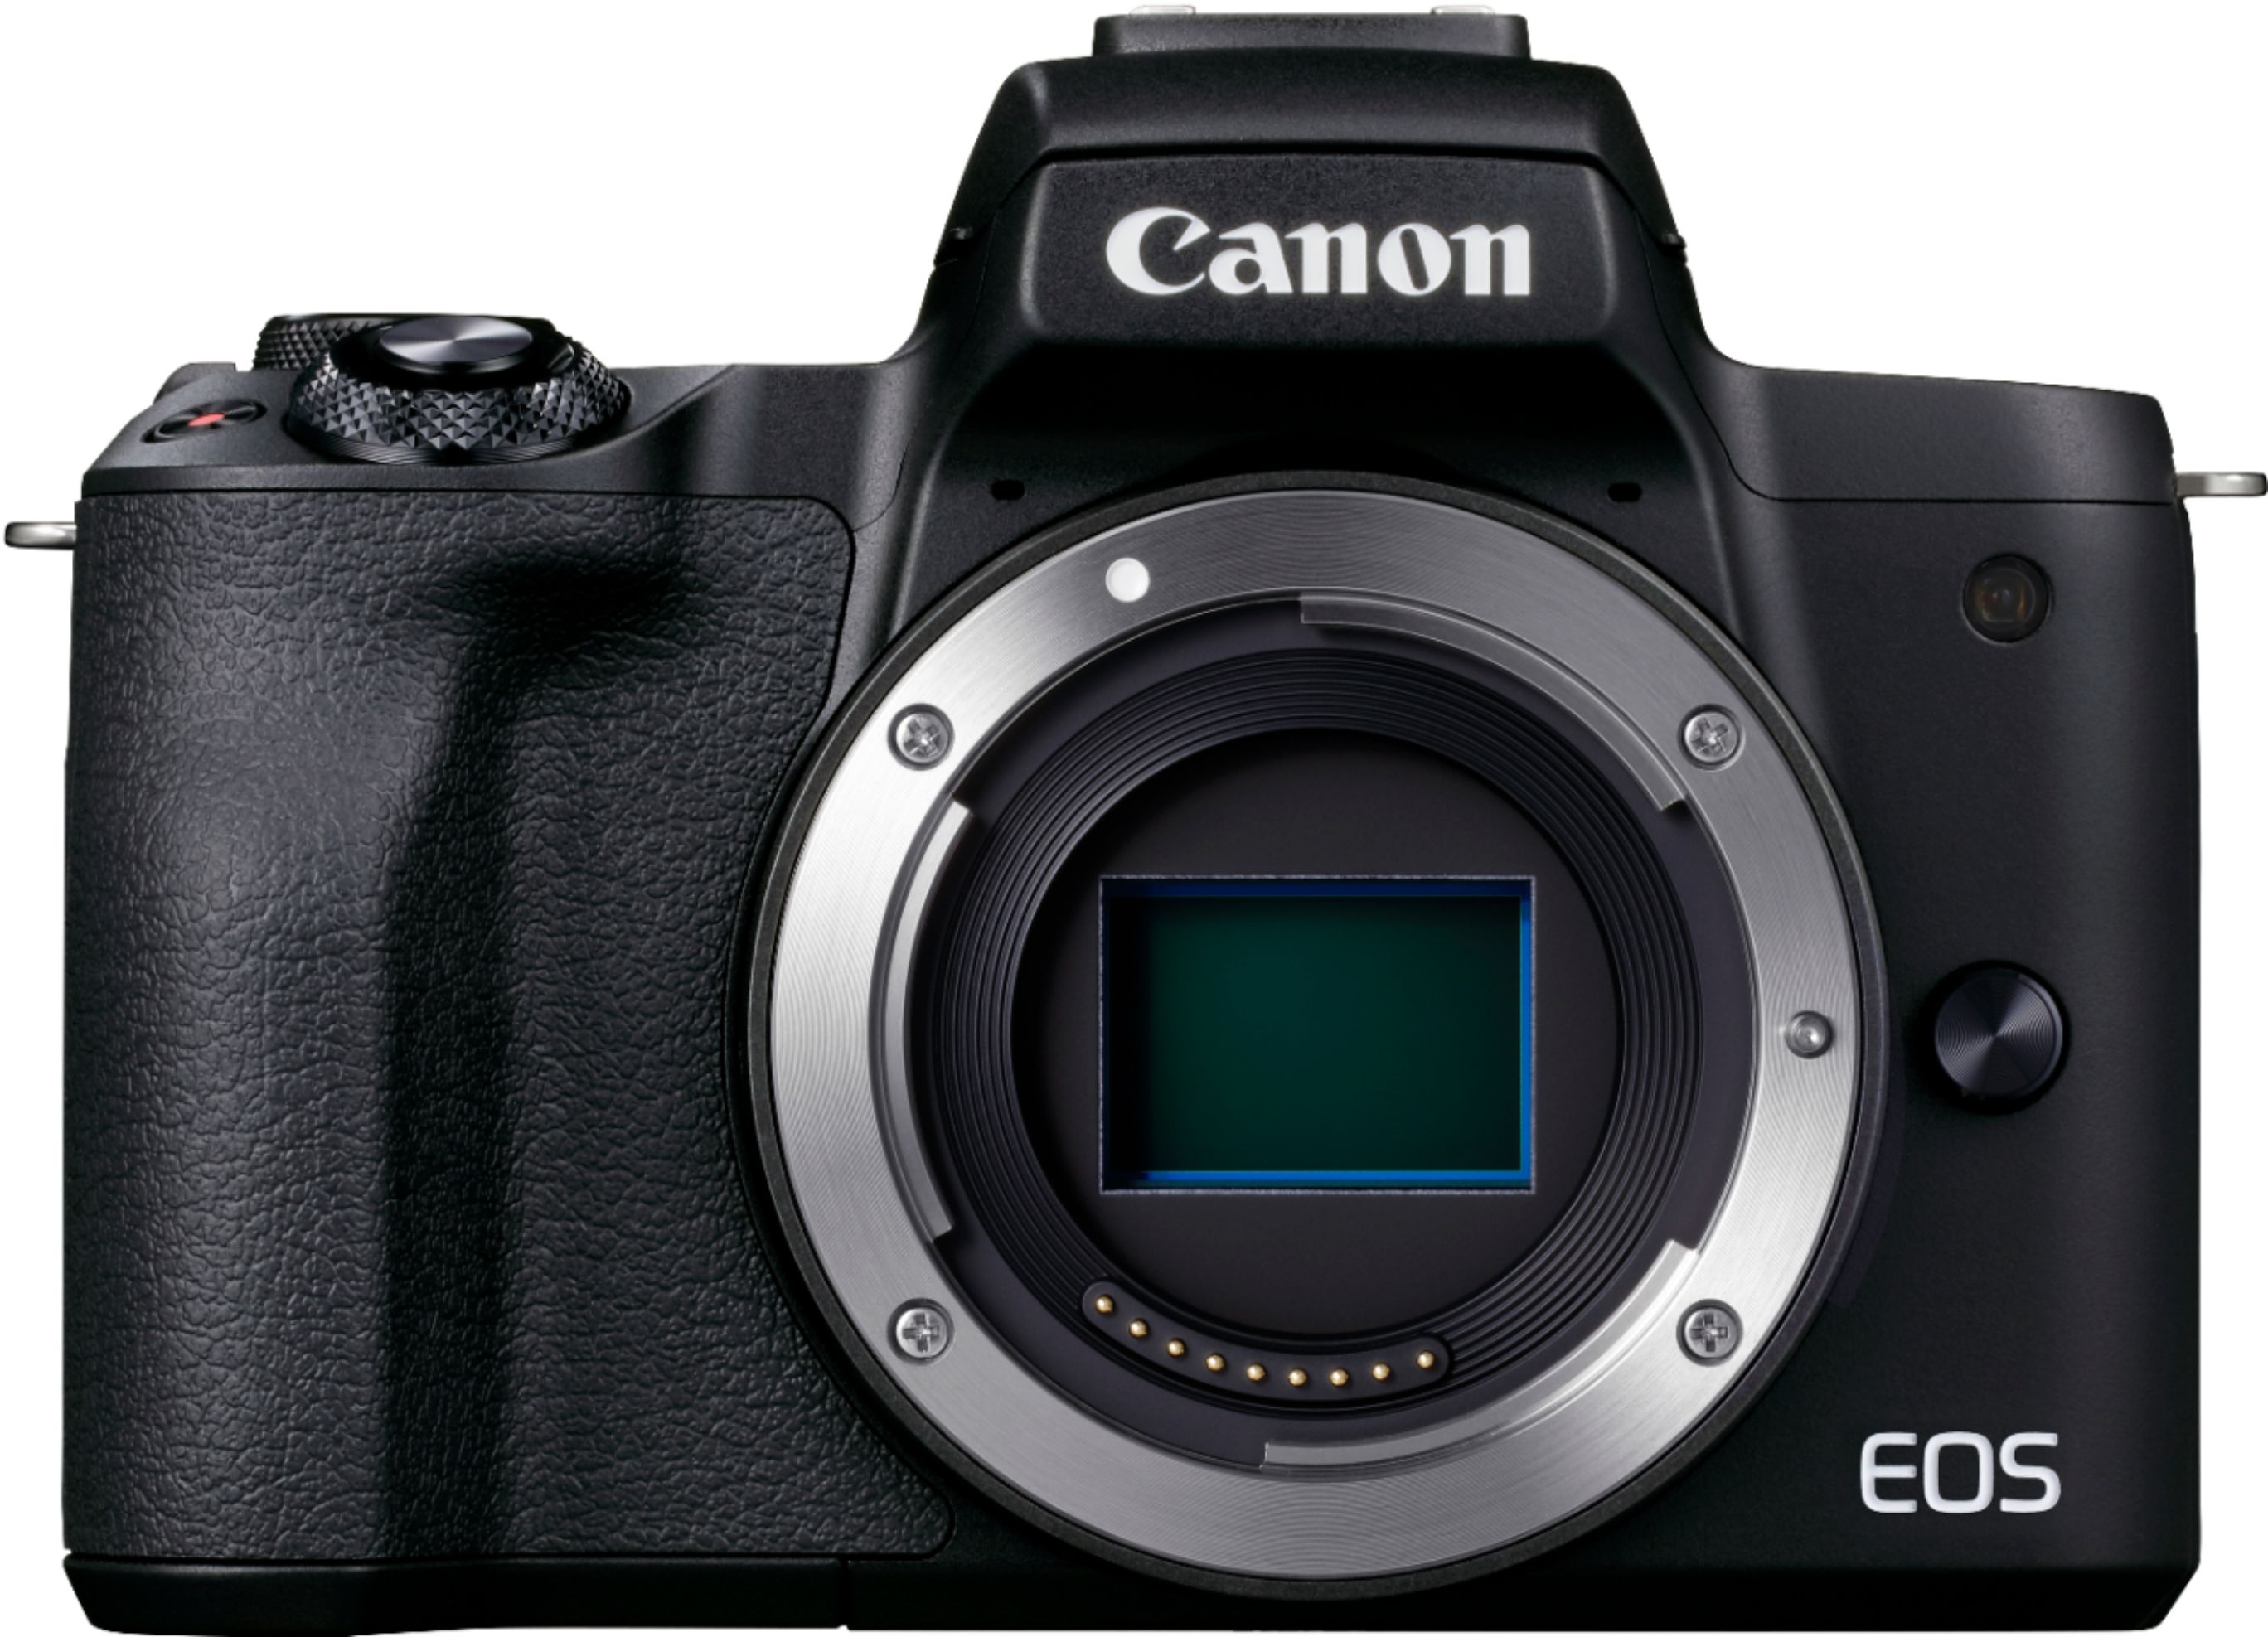 Canon EOS M50 Mark II Mirrorless Camera with EF-M 15-45mm f/3.5-6.3 IS STM  Zoom Lens Black 4728C006 - Best Buy